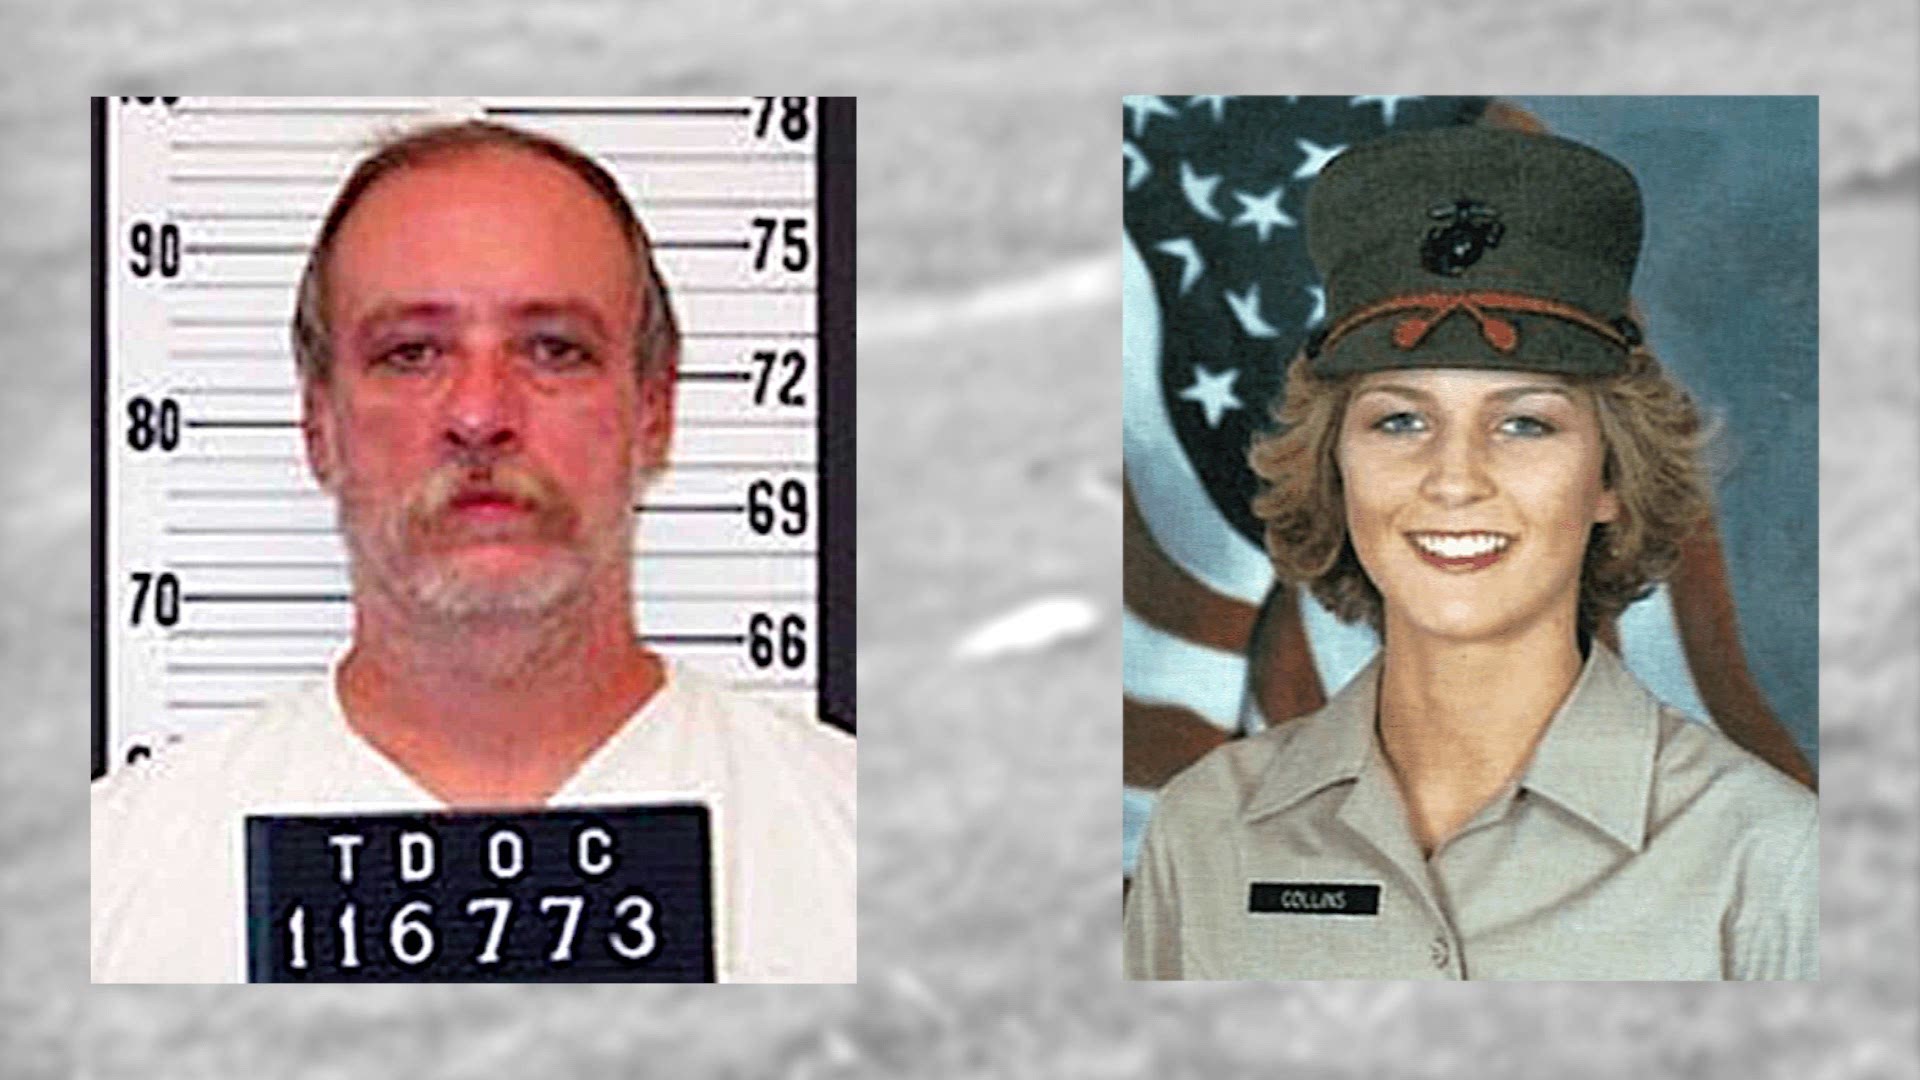 Sedley Alley was convicted of savagely assaulting and killing U.S. Marine Corps trainee Suzanne Collins in July of 1985 at the Naval Air Station in Millington, Tenn.